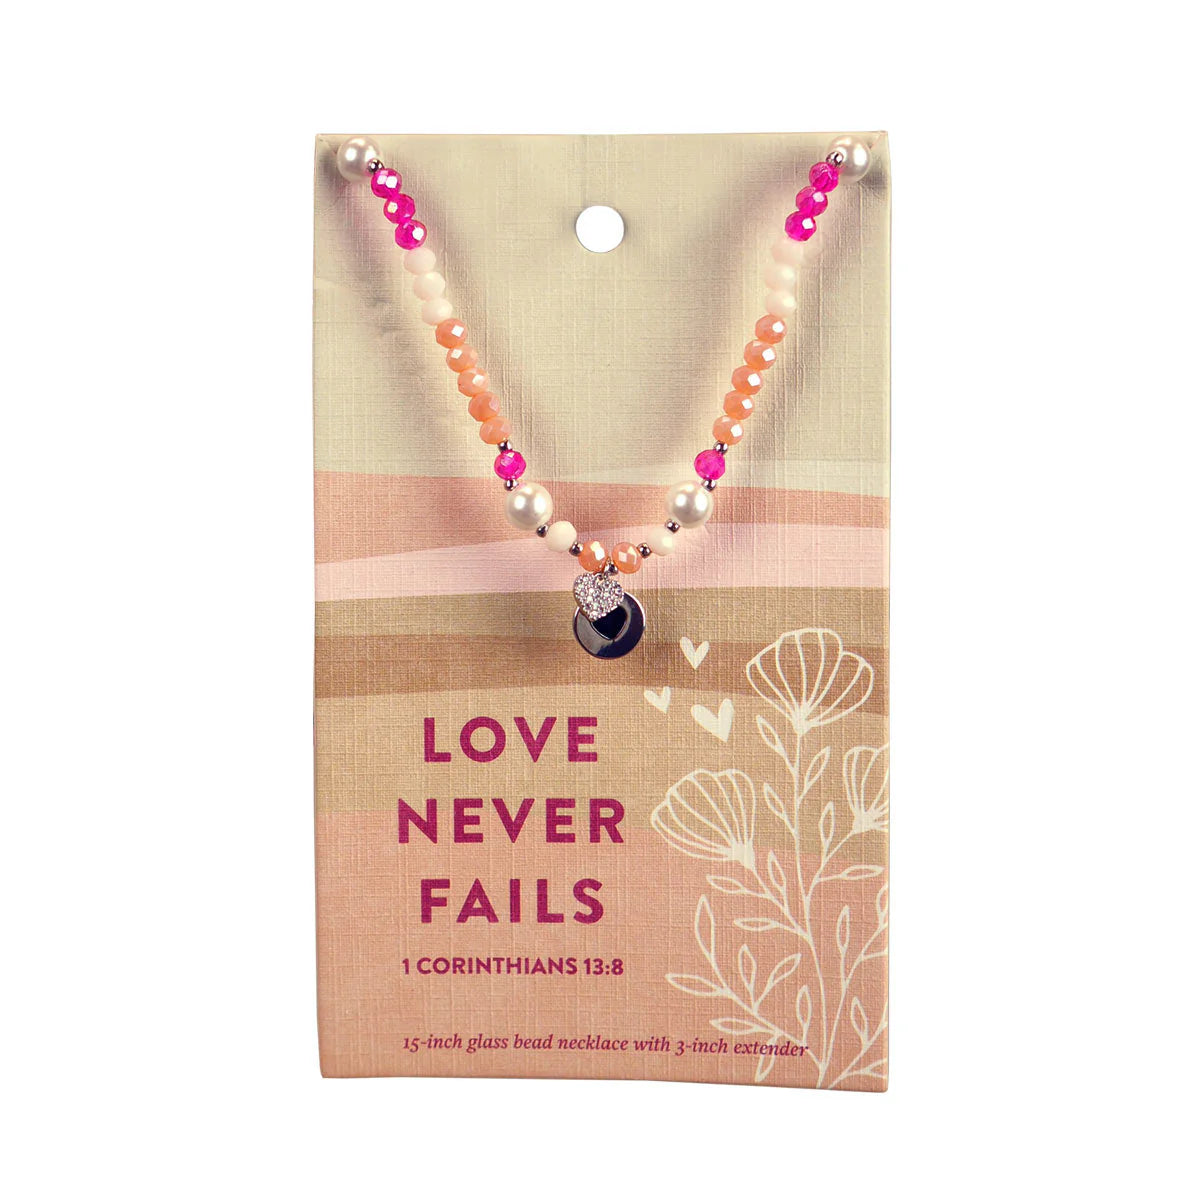 grace & truth Womens Necklace Love Never Fails grace & truth® accessories jewelry Women's